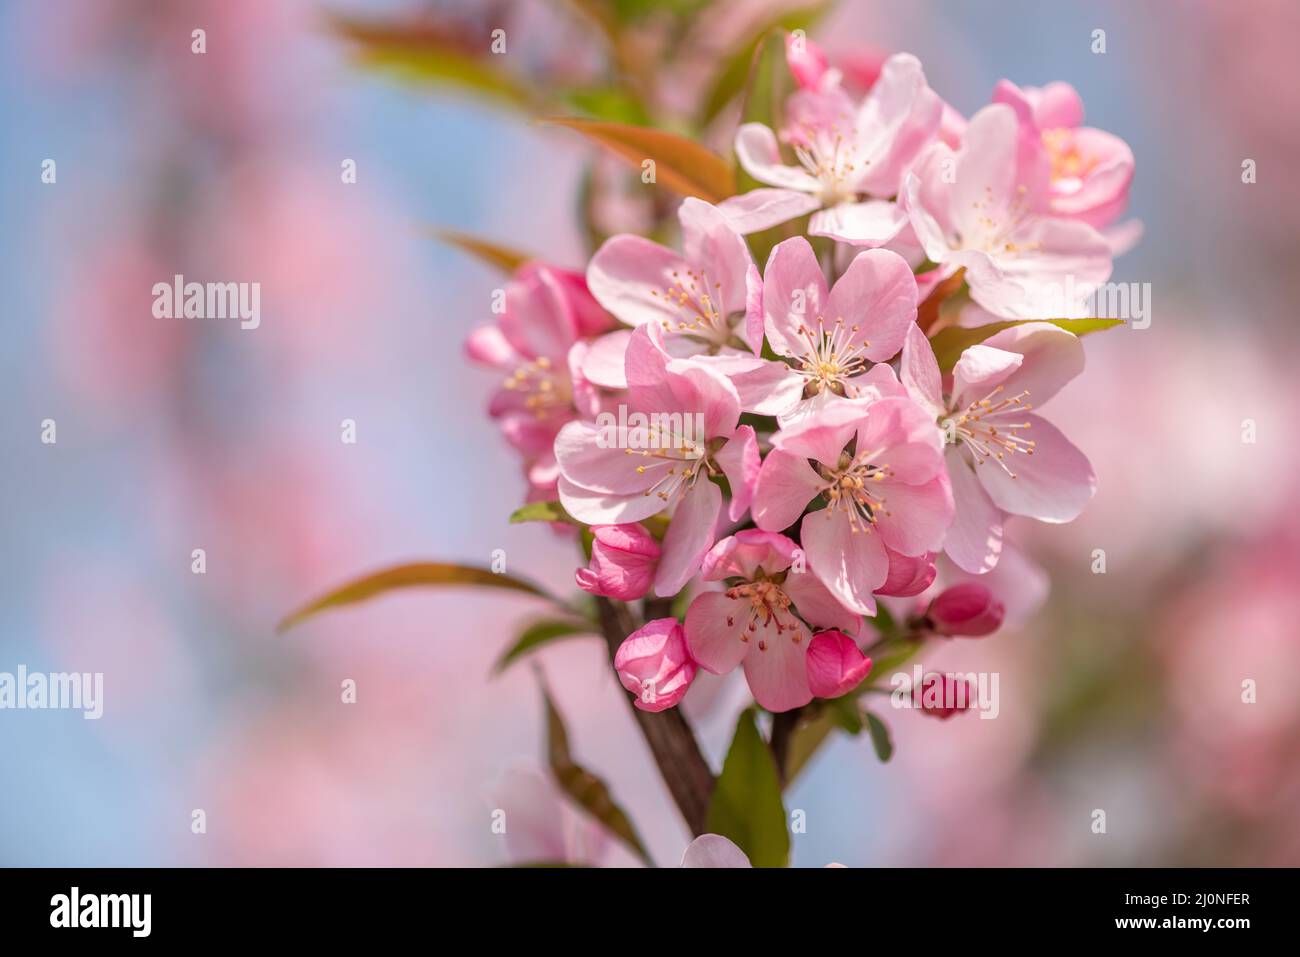 Peach tree flowers against blue sky close-up view Stock Photo